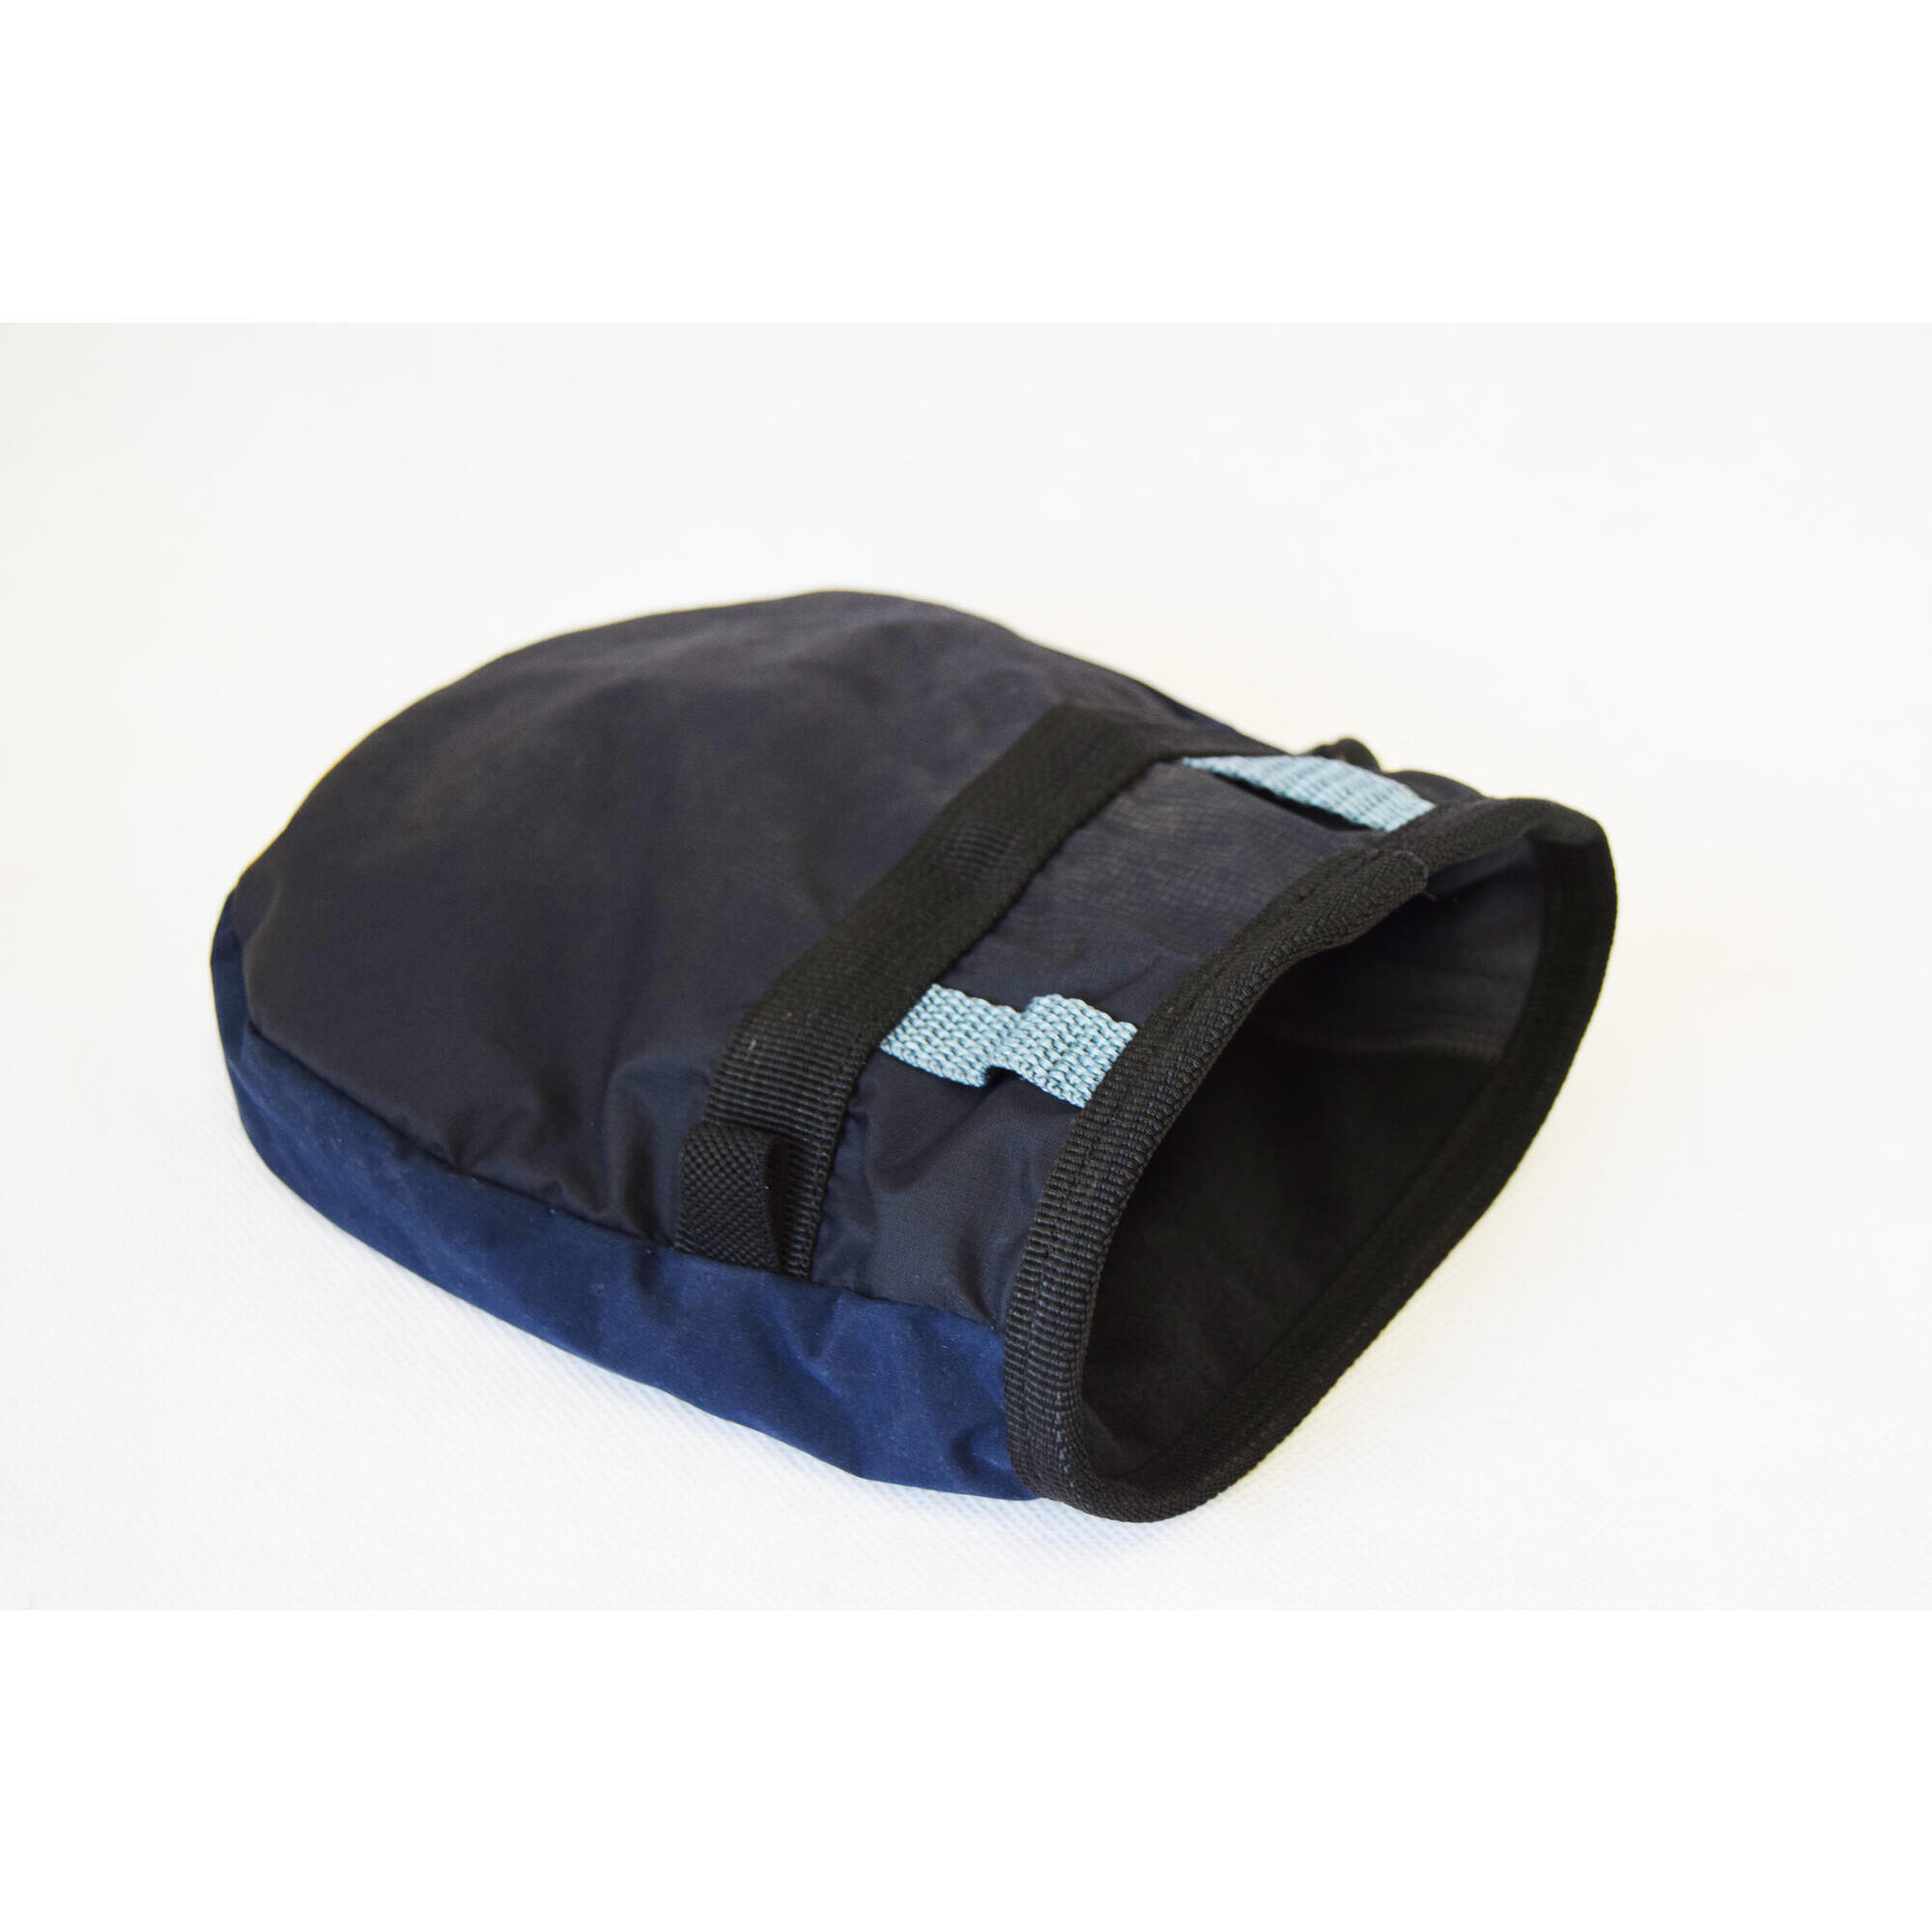 Upcycled fabric climbing chalk bag made in the UK / Black 2/3